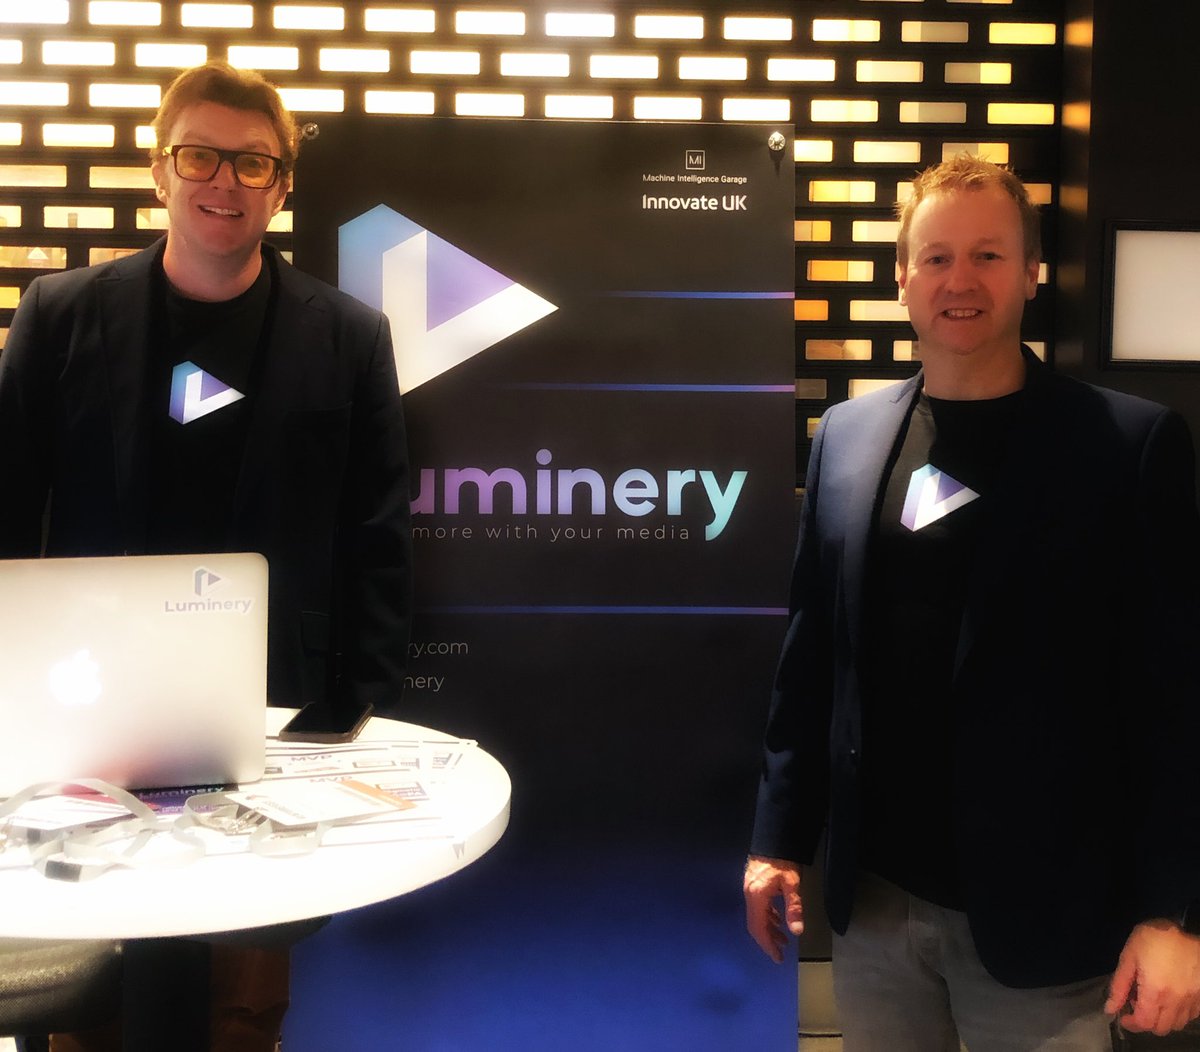 The team were at #vfestox running the @Luminery demo today, in amongst some other really wicked startups. We won the KPMG prize, so it was worth making T-Shirts! Good stuff. Get that metadata flowing. @VenturefestOXON